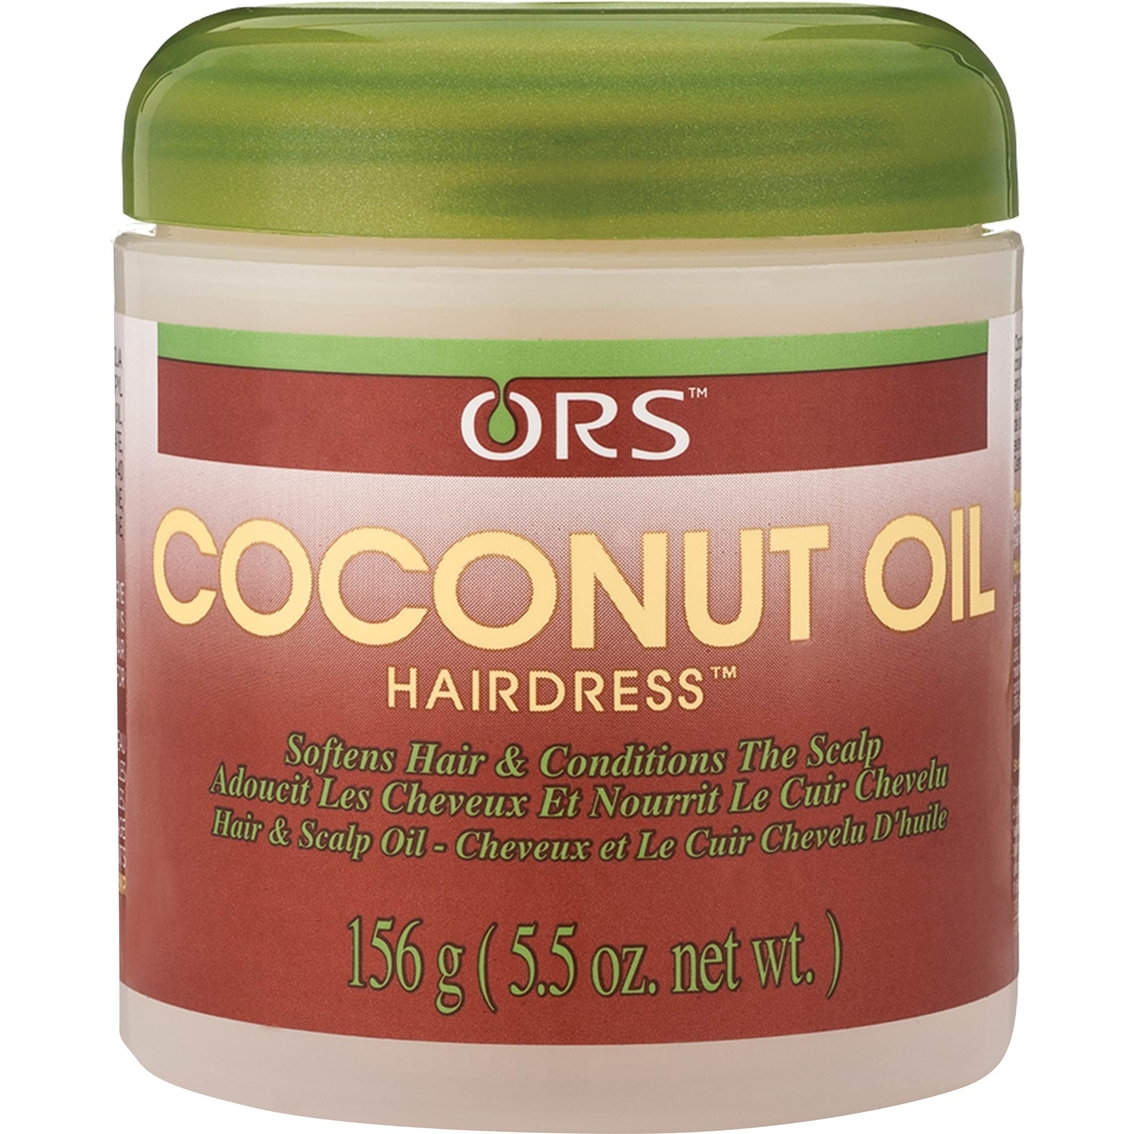 Ors Coconut Oil Hairdress | Hair Care Products | Beauty & Health | Shop ...